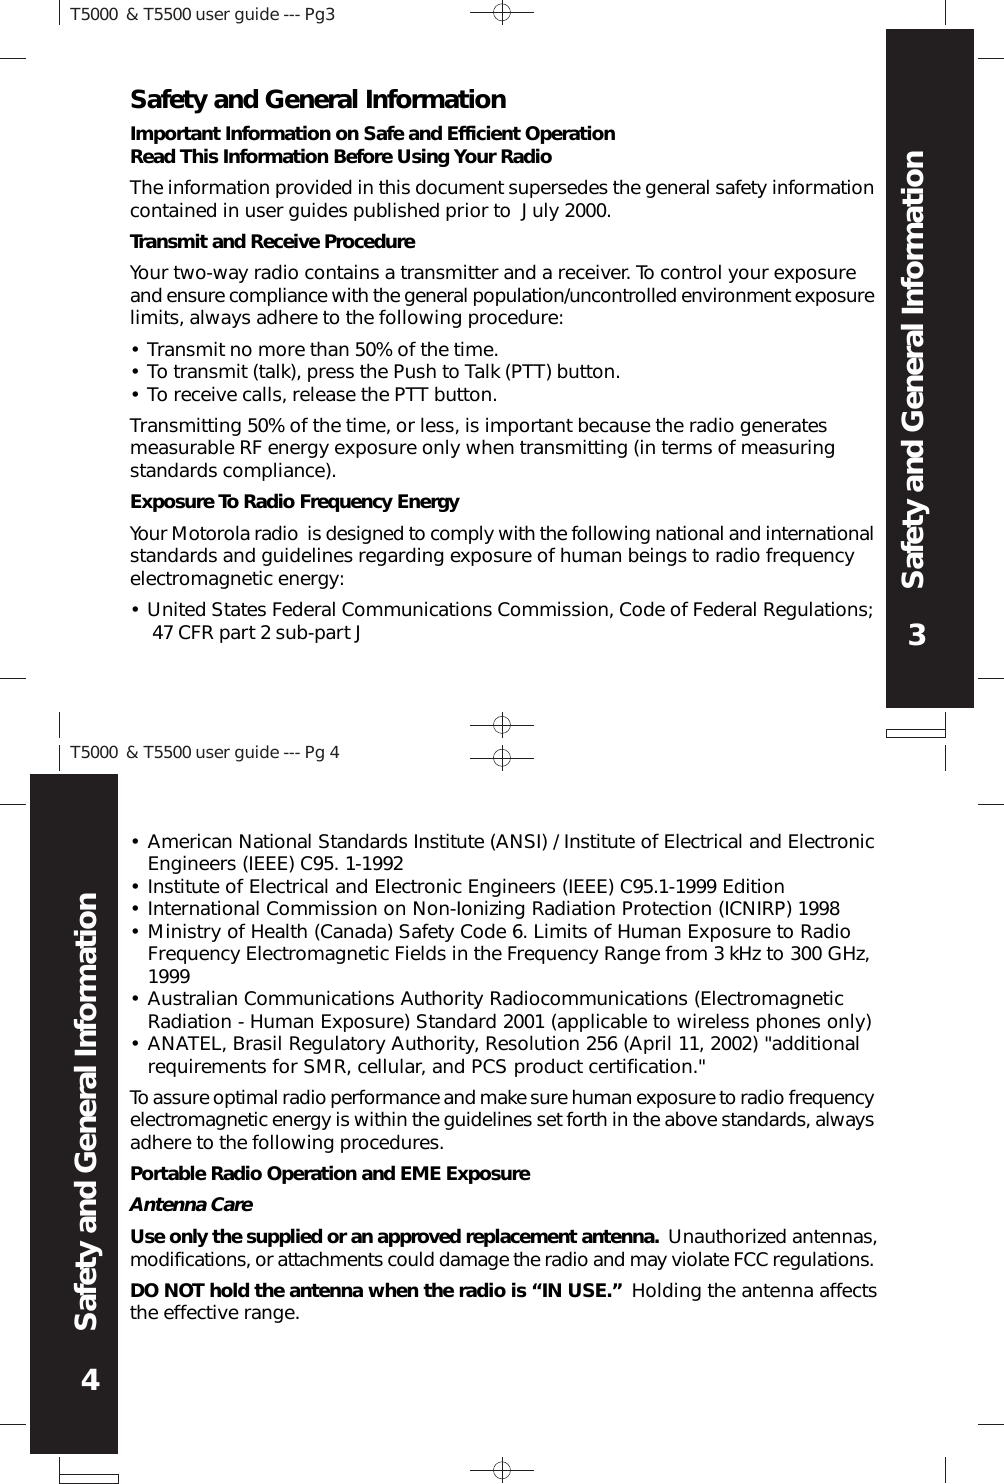 4T5000 &amp; T5500 user guide --- Pg 4T5000 &amp; T5500 user guide --- Pg33Safety and General InformationSafety and General InformationImportant Information on Safe and Efficient OperationRead This Information Before Using Your RadioThe information provided in this document supersedes the general safety informationcontained in user guides published prior to  July 2000.Transmit and Receive ProcedureYour two-way radio contains a transmitter and a receiver. To control your exposureand ensure compliance with the general population/uncontrolled environment exposurelimits, always adhere to the following procedure:Exposure To Radio Frequency EnergyYour Motorola radio  is designed to comply with the following national and internationalstandards and guidelines regarding exposure of human beings to radio frequencyelectromagnetic energy:Transmit no more than 50% of the time.To transmit (talk), press the Push to Talk (PTT) button.To receive calls, release the PTT button.•••Transmitting 50% of the time, or less, is important because the radio generatesmeasurable RF energy exposure only when transmitting (in terms of measuringstandards compliance).• United States Federal Communications Commission, Code of Federal Regulations; 47 CFR part 2 sub-part JAmerican National Standards Institute (ANSI) / Institute of Electrical and ElectronicEngineers (IEEE) C95. 1-1992Institute of Electrical and Electronic Engineers (IEEE) C95.1-1999 EditionInternational Commission on Non-Ionizing Radiation Protection (ICNIRP) 1998Ministry of Health (Canada) Safety Code 6. Limits of Human Exposure to RadioFrequency Electromagnetic Fields in the Frequency Range from 3 kHz to 300 GHz,1999Australian Communications Authority Radiocommunications (ElectromagneticRadiation - Human Exposure) Standard 2001 (applicable to wireless phones only)ANATEL, Brasil Regulatory Authority, Resolution 256 (April 11, 2002) &quot;additionalrequirements for SMR, cellular, and PCS product certification.&quot;To assure optimal radio performance and make sure human exposure to radio frequencyelectromagnetic energy is within the guidelines set forth in the above standards, alwaysadhere to the following procedures.Portable Radio Operation and EME ExposureAntenna CareUse only the supplied or an approved replacement antenna. Unauthorized antennas,modifications, or attachments could damage the radio and may violate FCC regulations.DO NOT hold the antenna when the radio is “IN USE.” Holding the antenna affectsthe effective range.••••••Safety and General Information